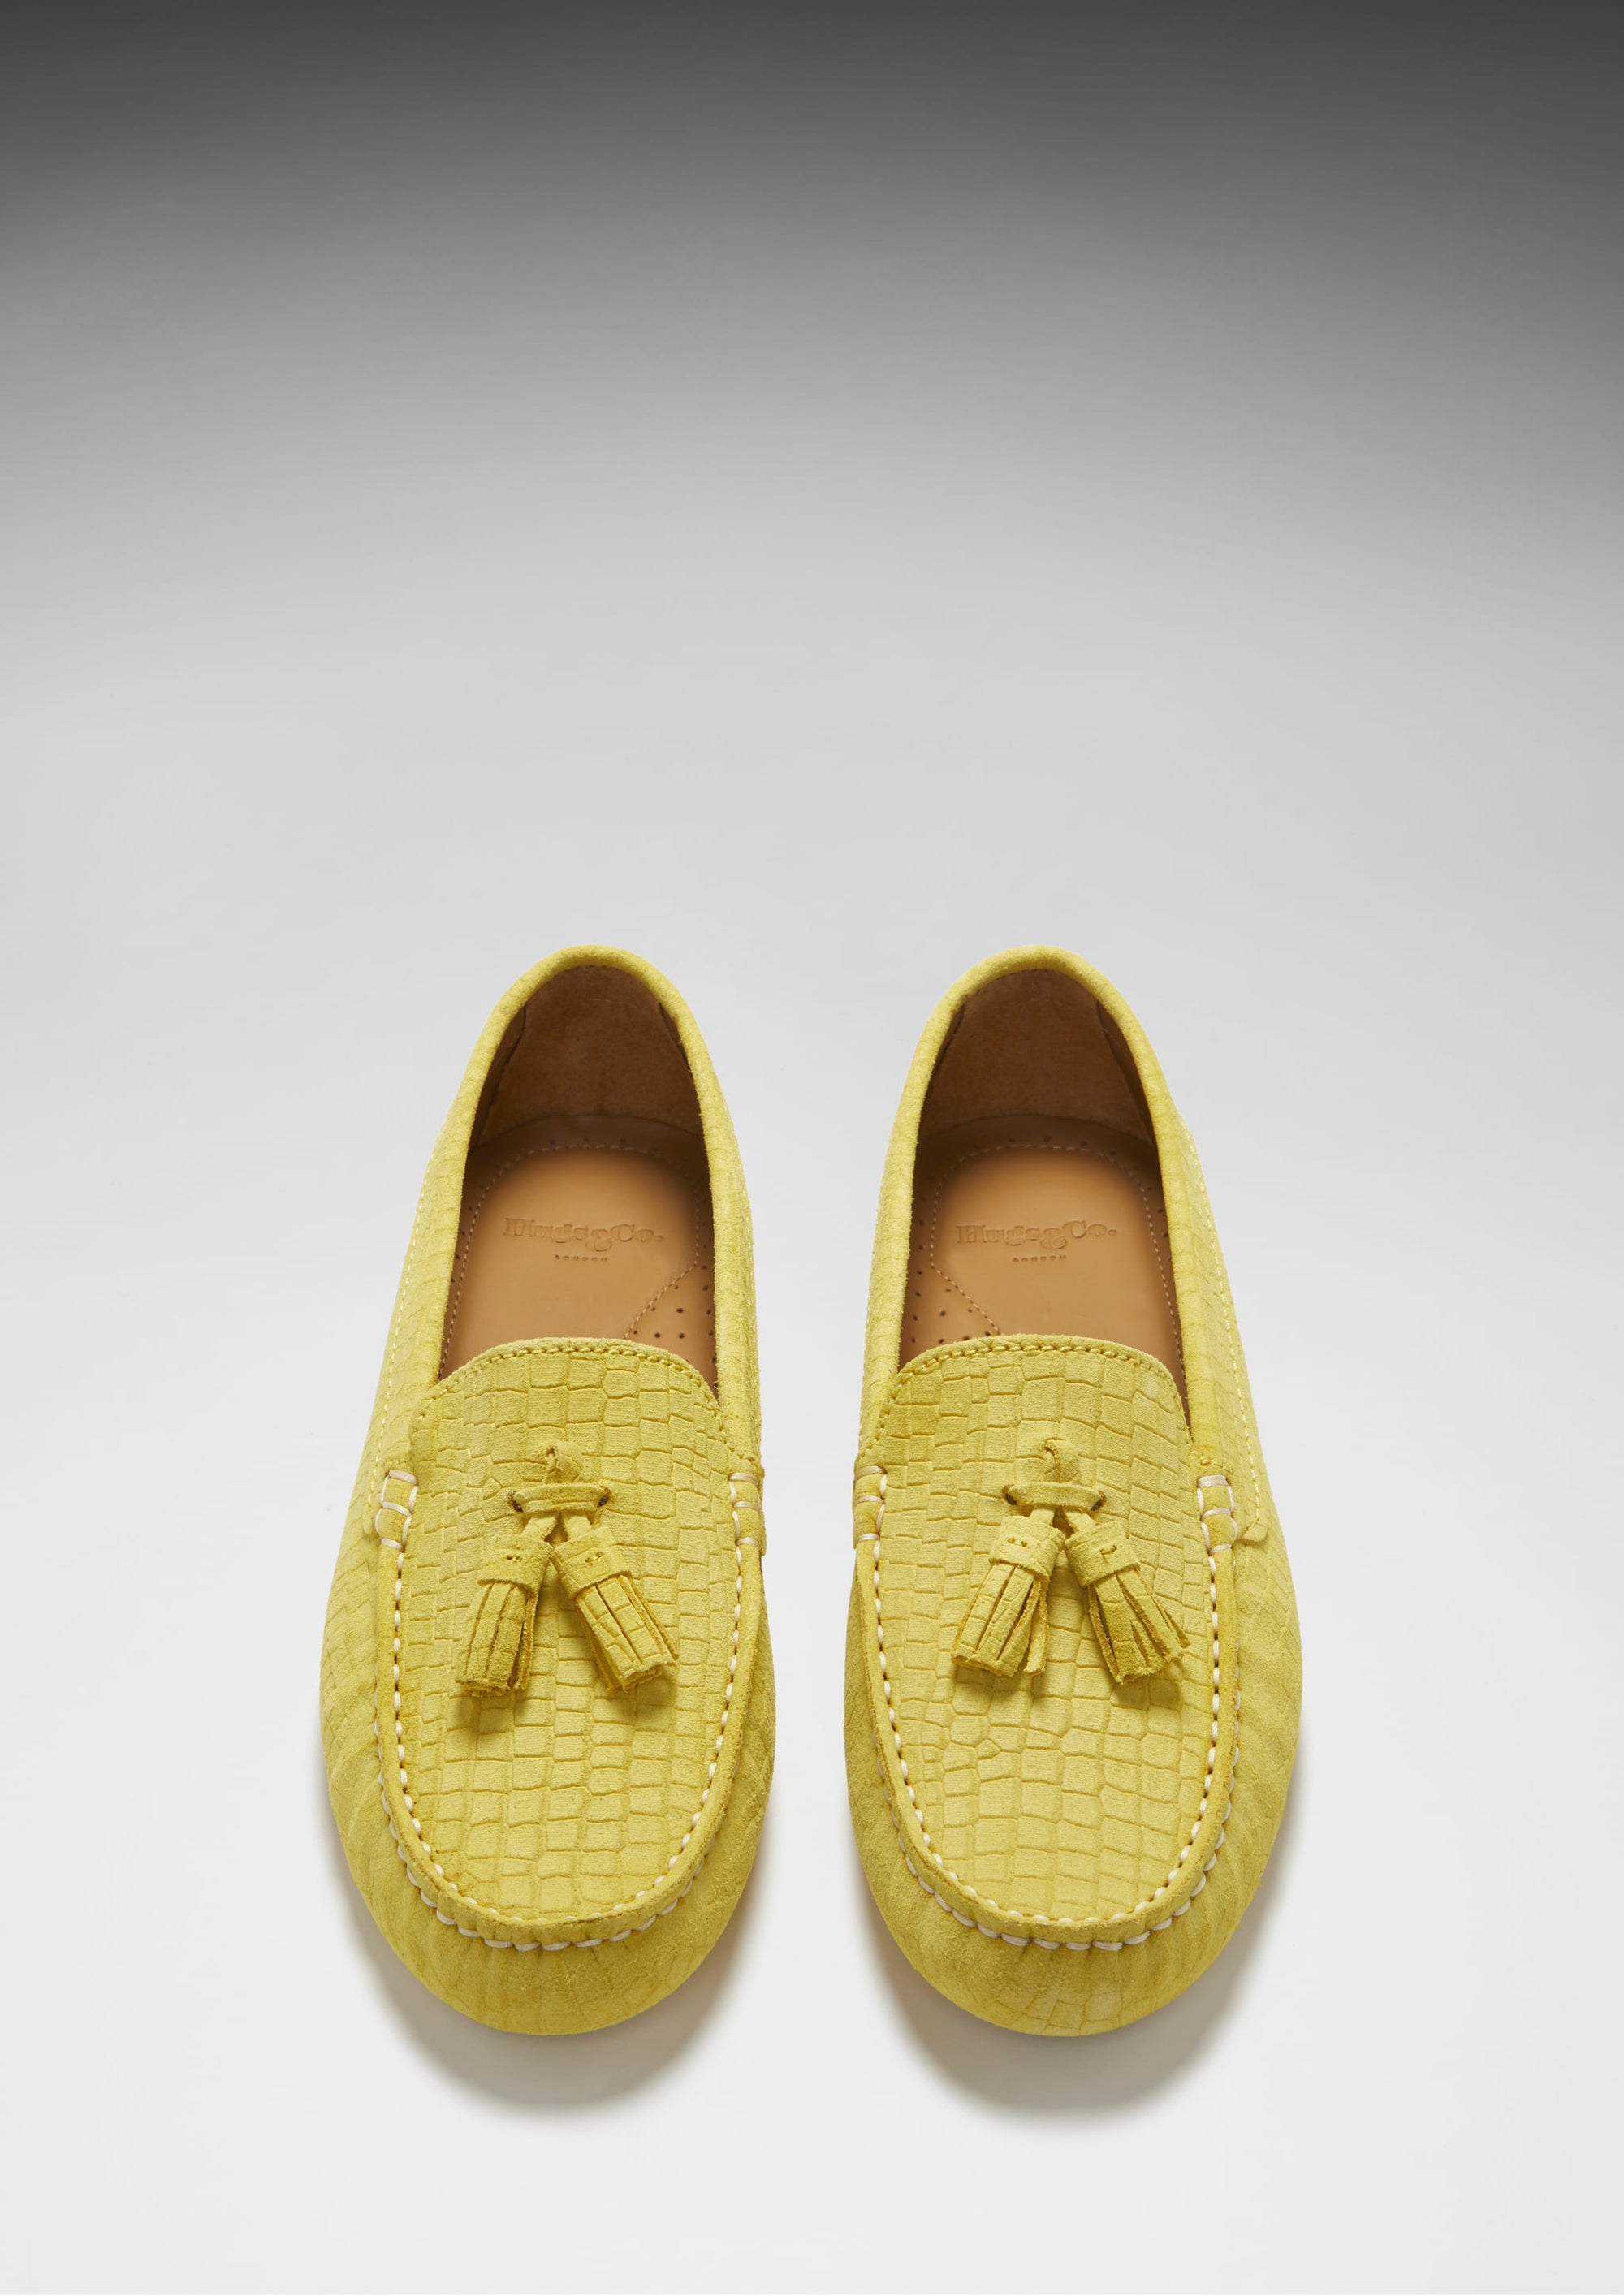 Women's Tasselled Driving Loafers, yellow embossed suede